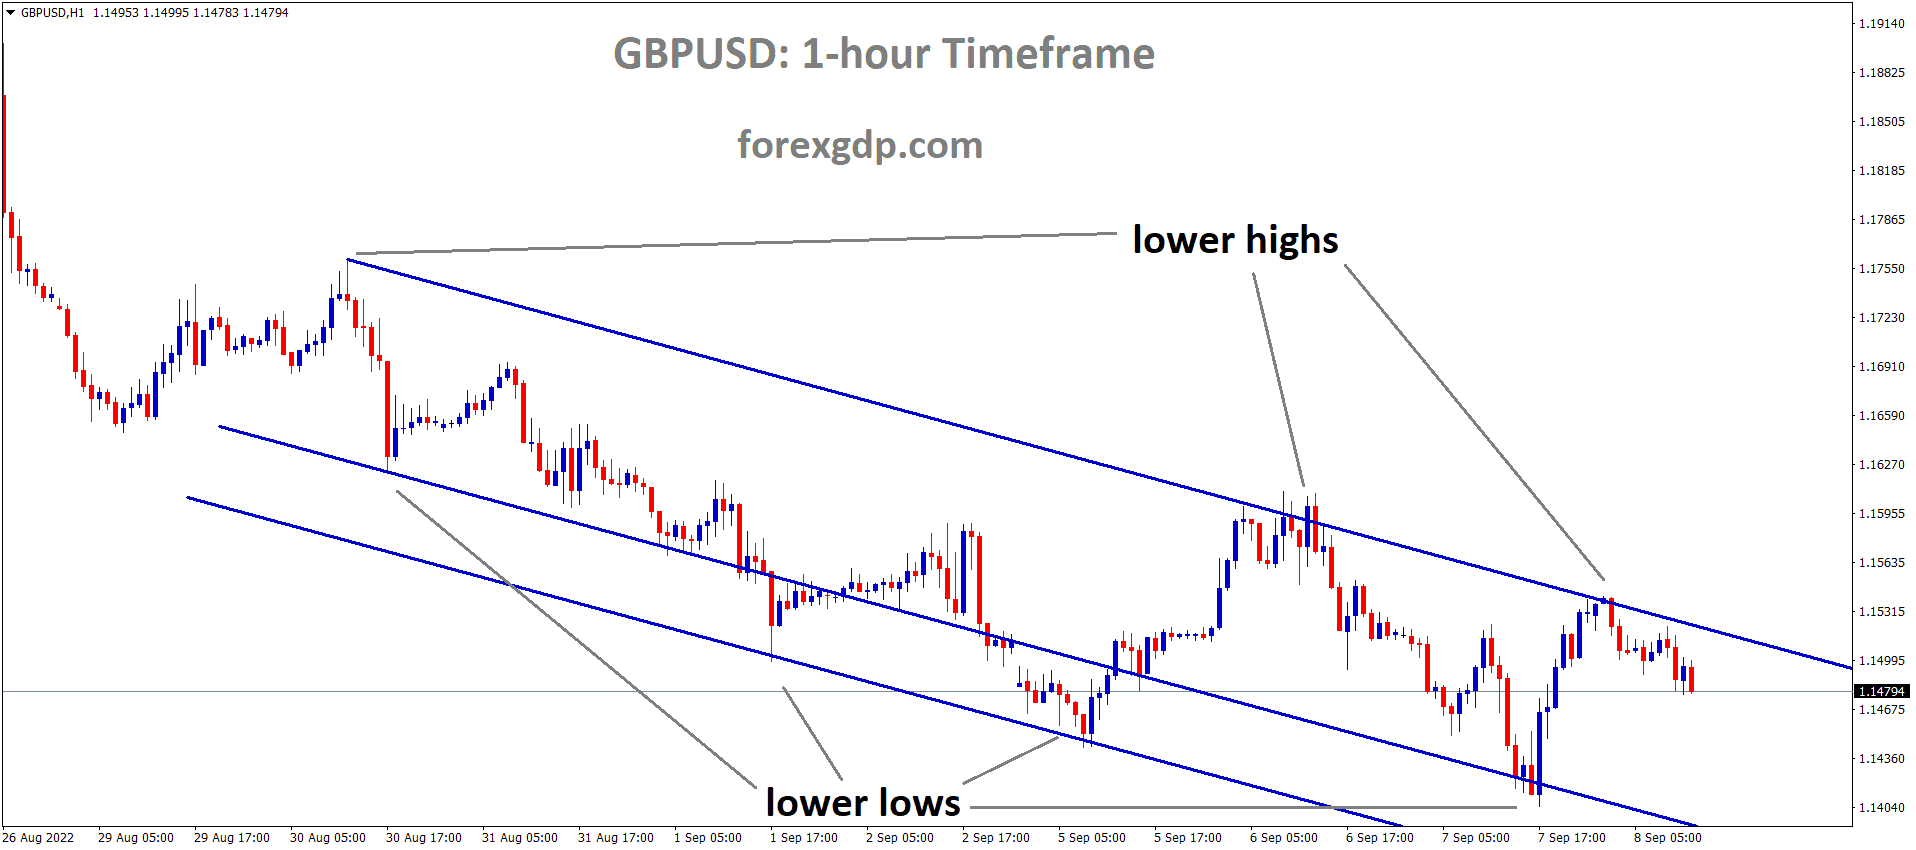 GBPUSD is moving in the Descending channel and the market has fallen from the lower high area of the channel.